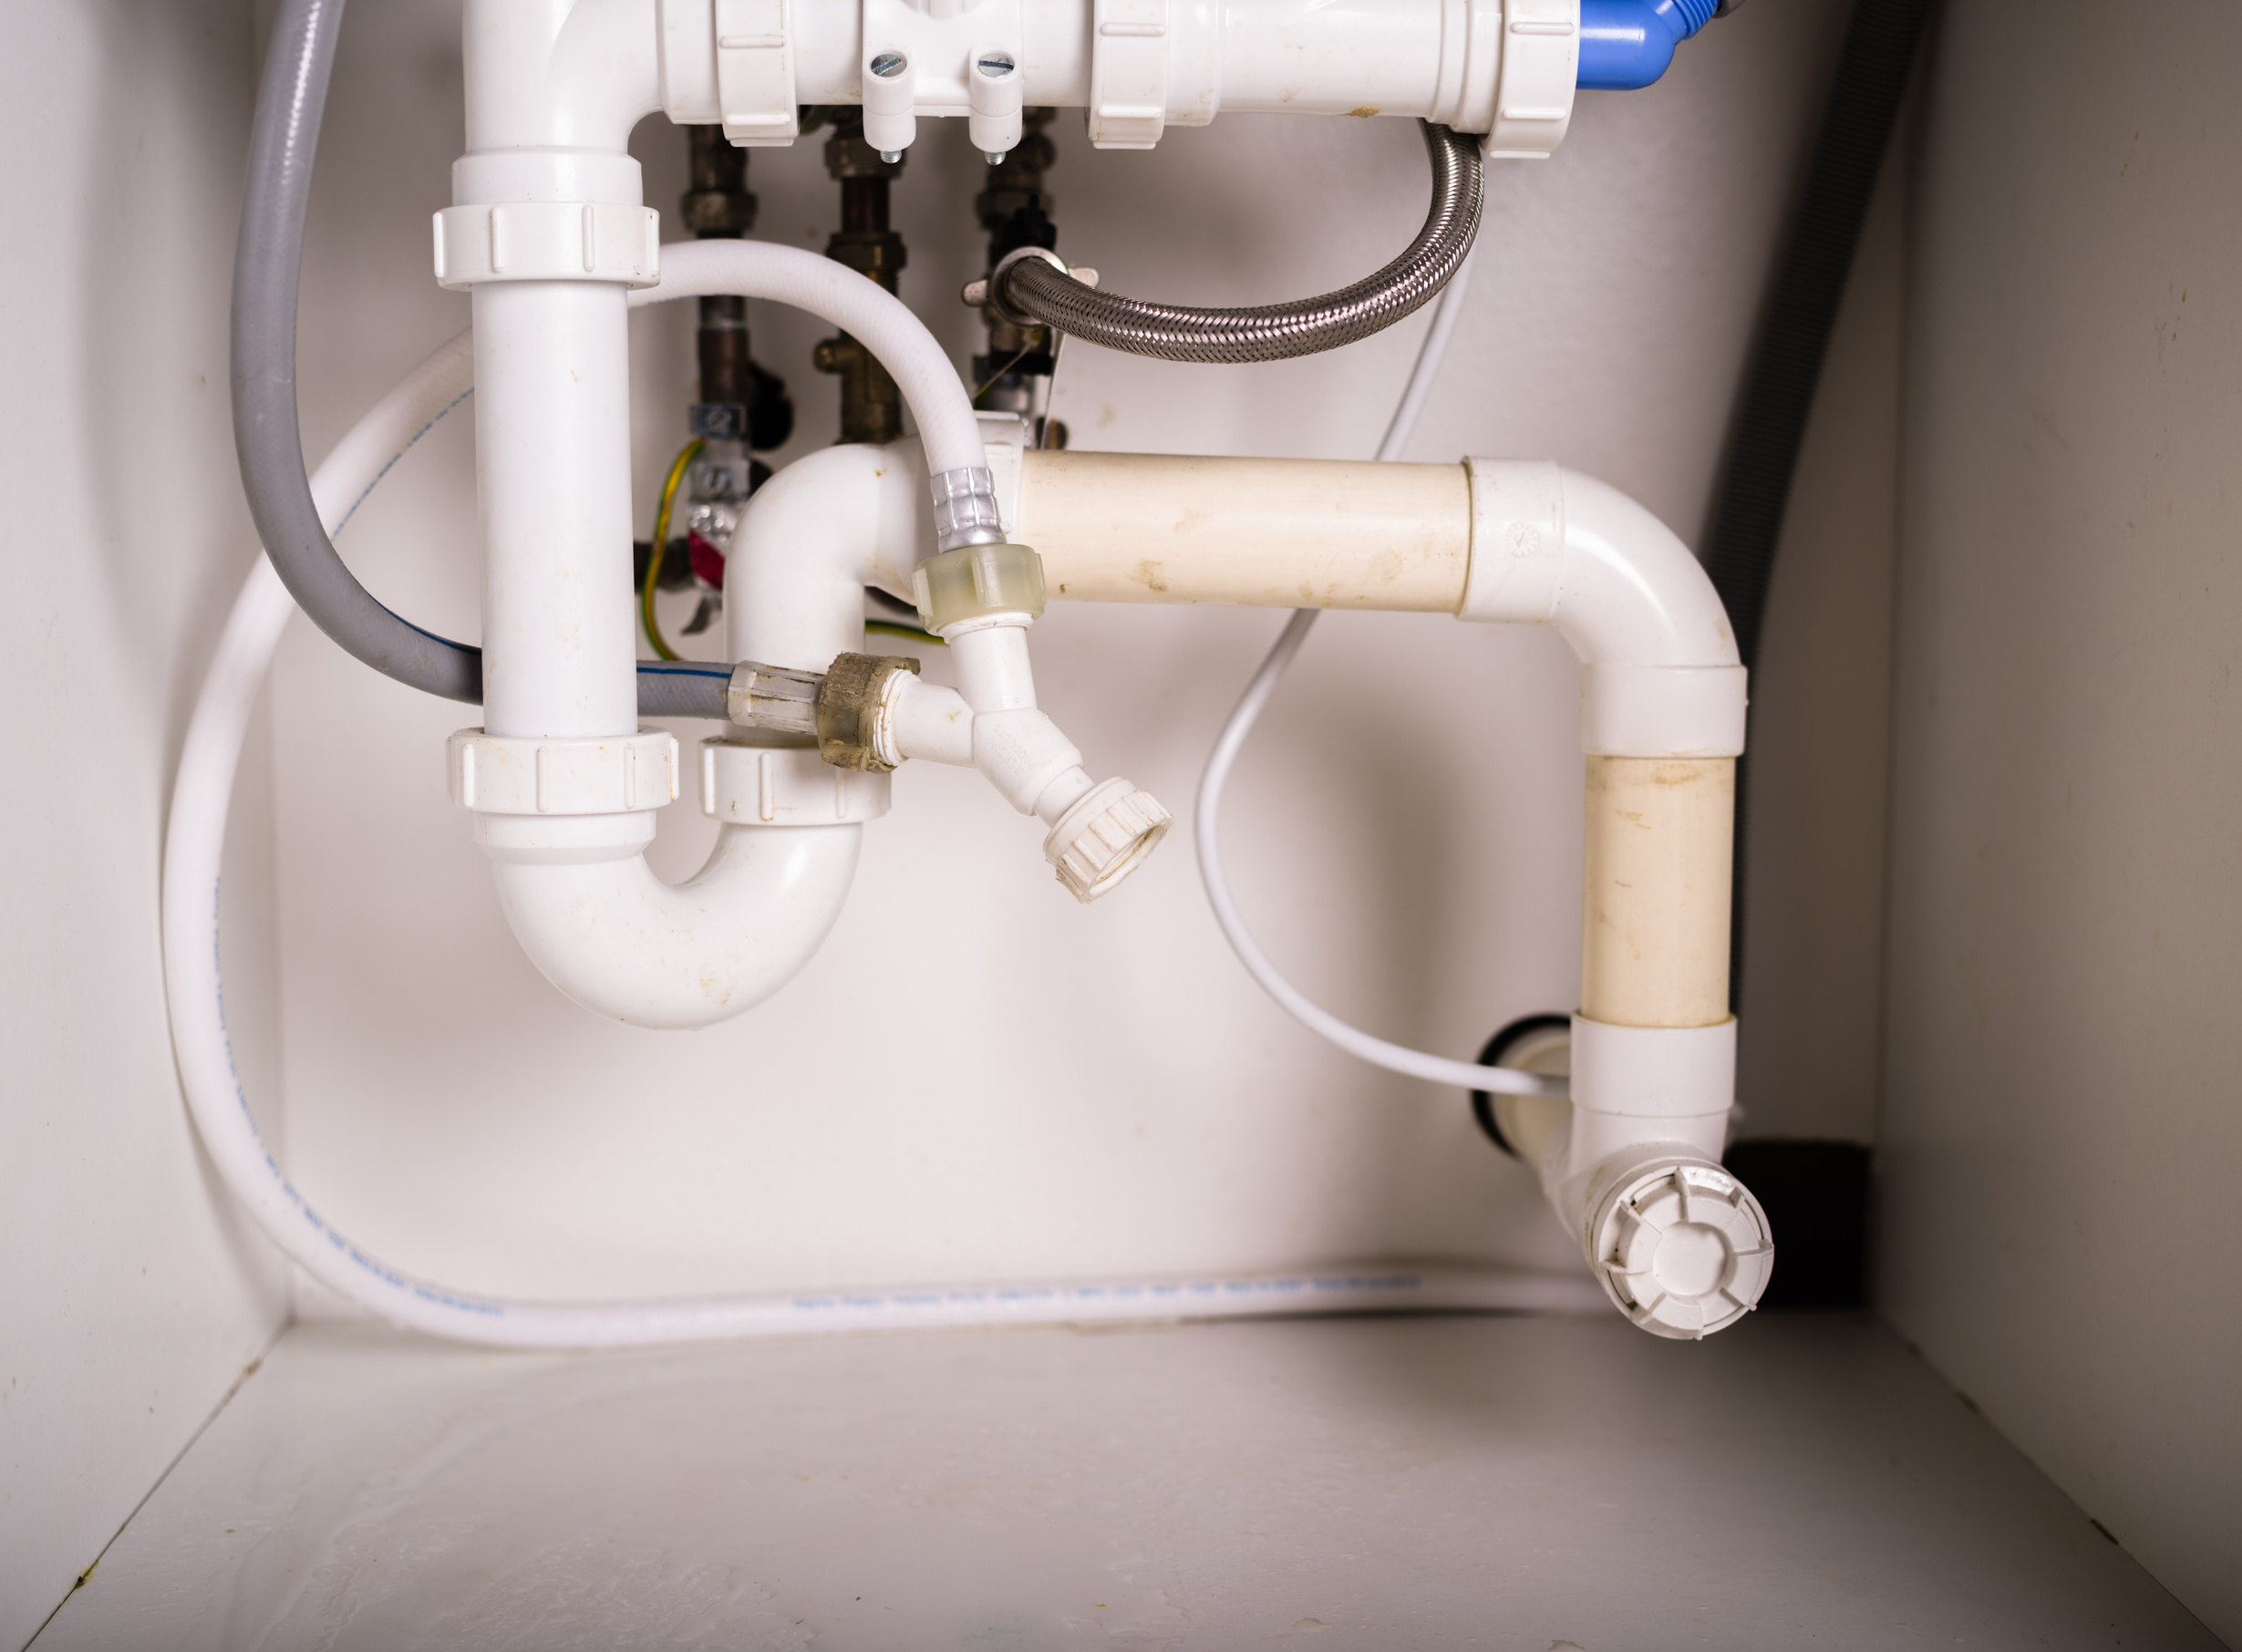 Pipes and Plumbing under Sink